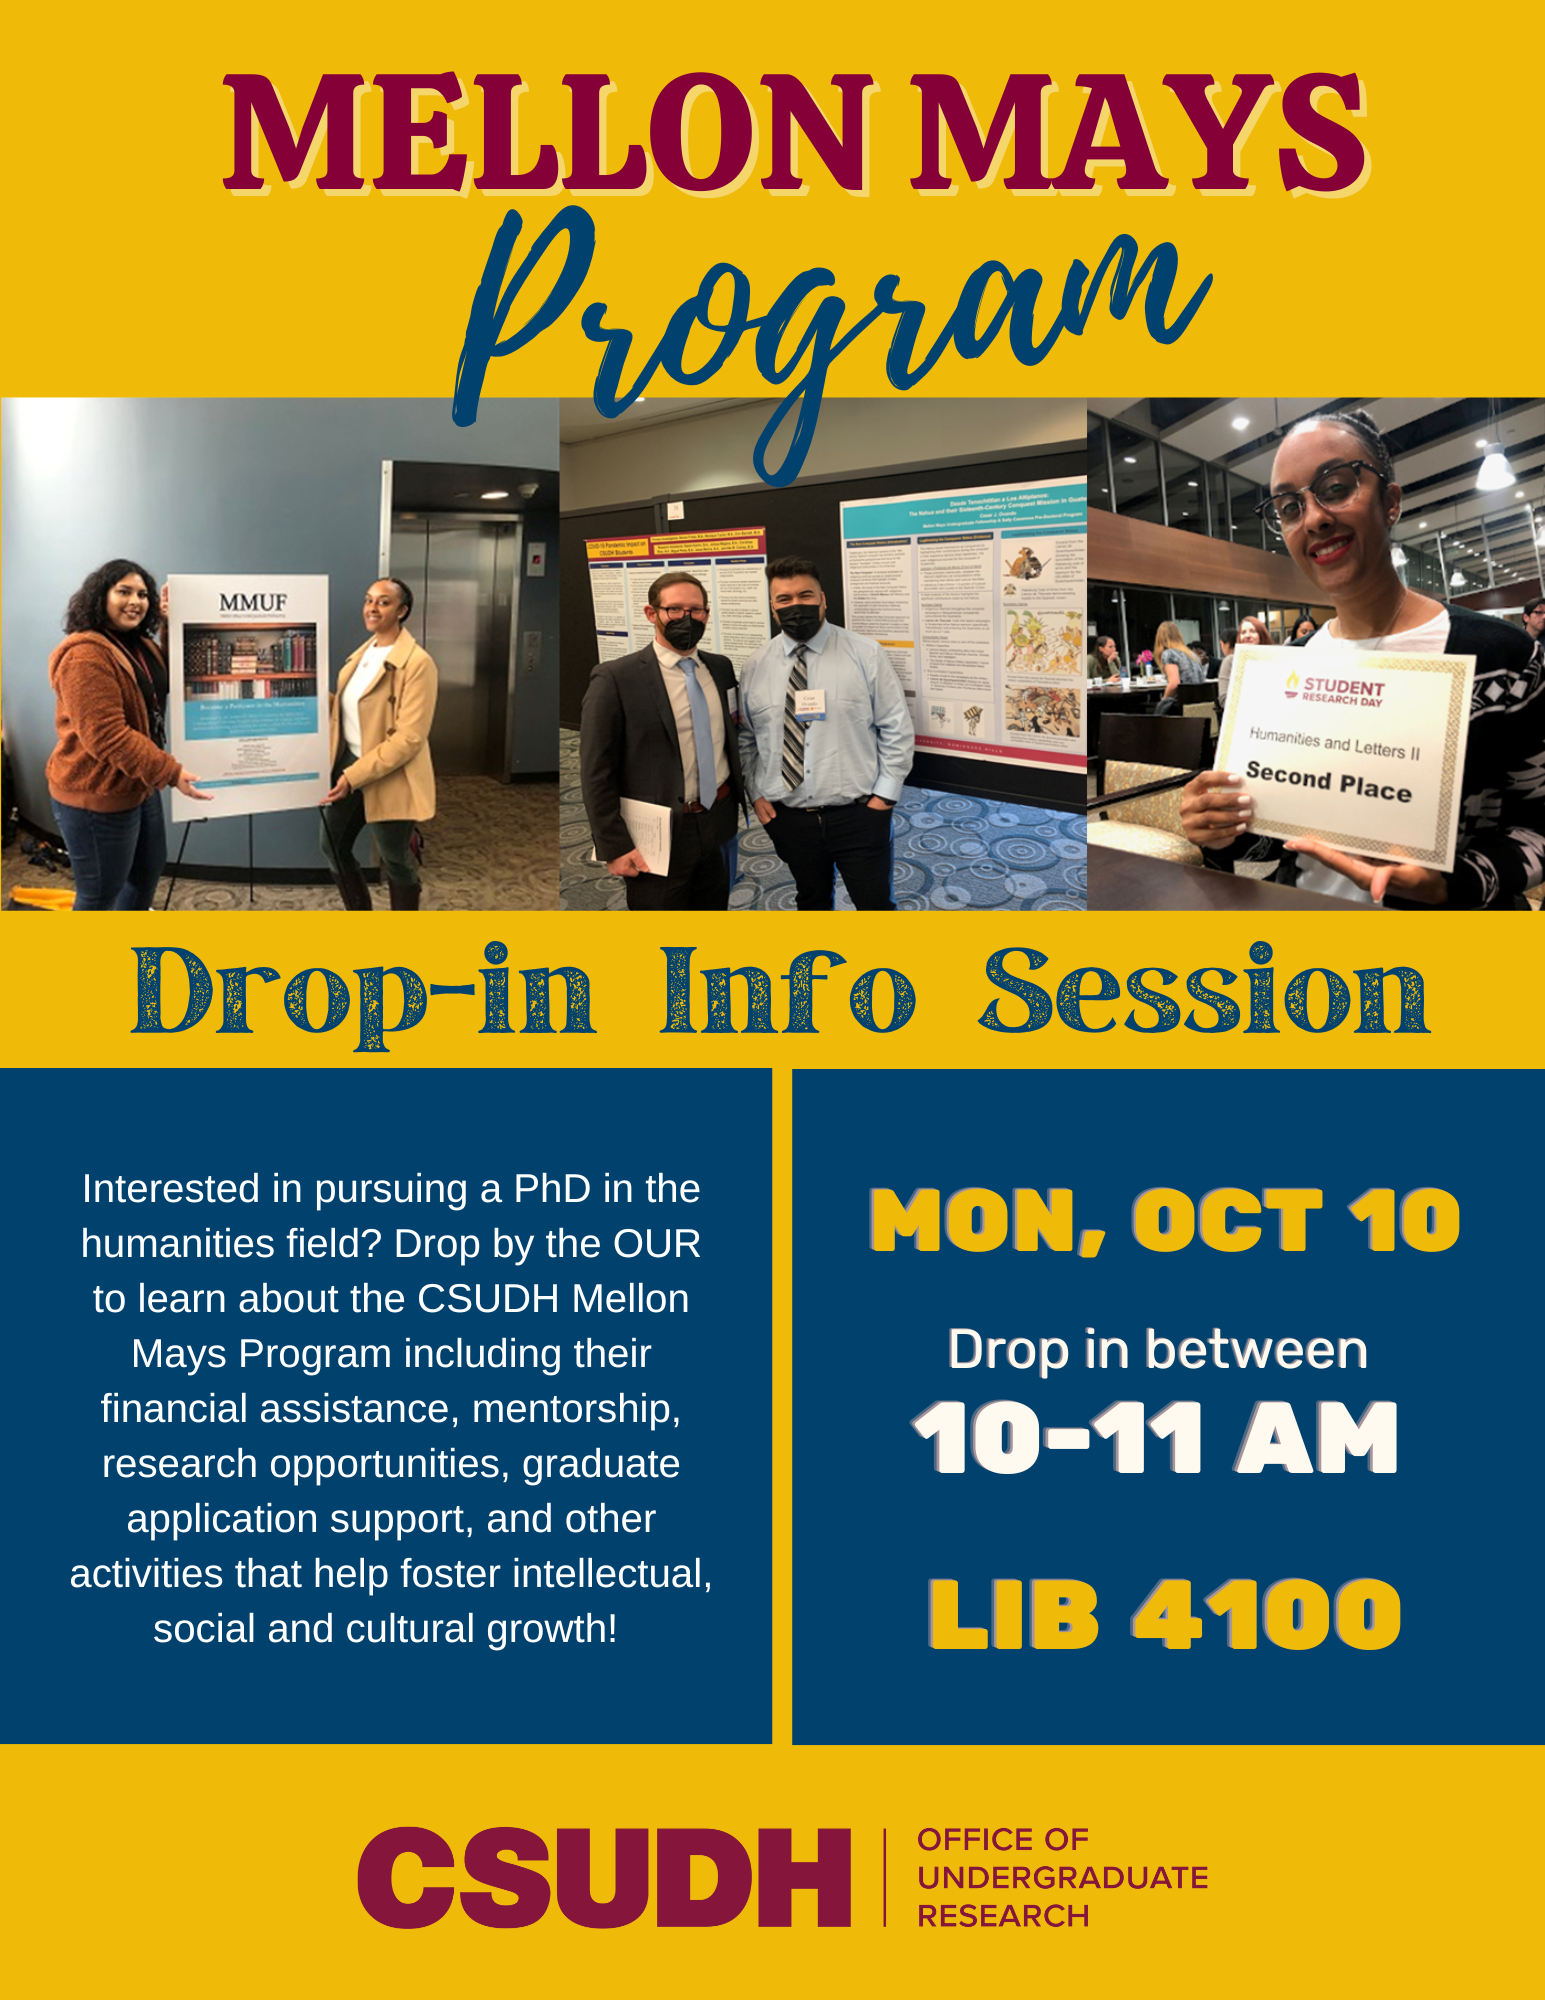 Mellon-Mays-Program-Drop-in-Info-Session-2-Oct-10-2022.png